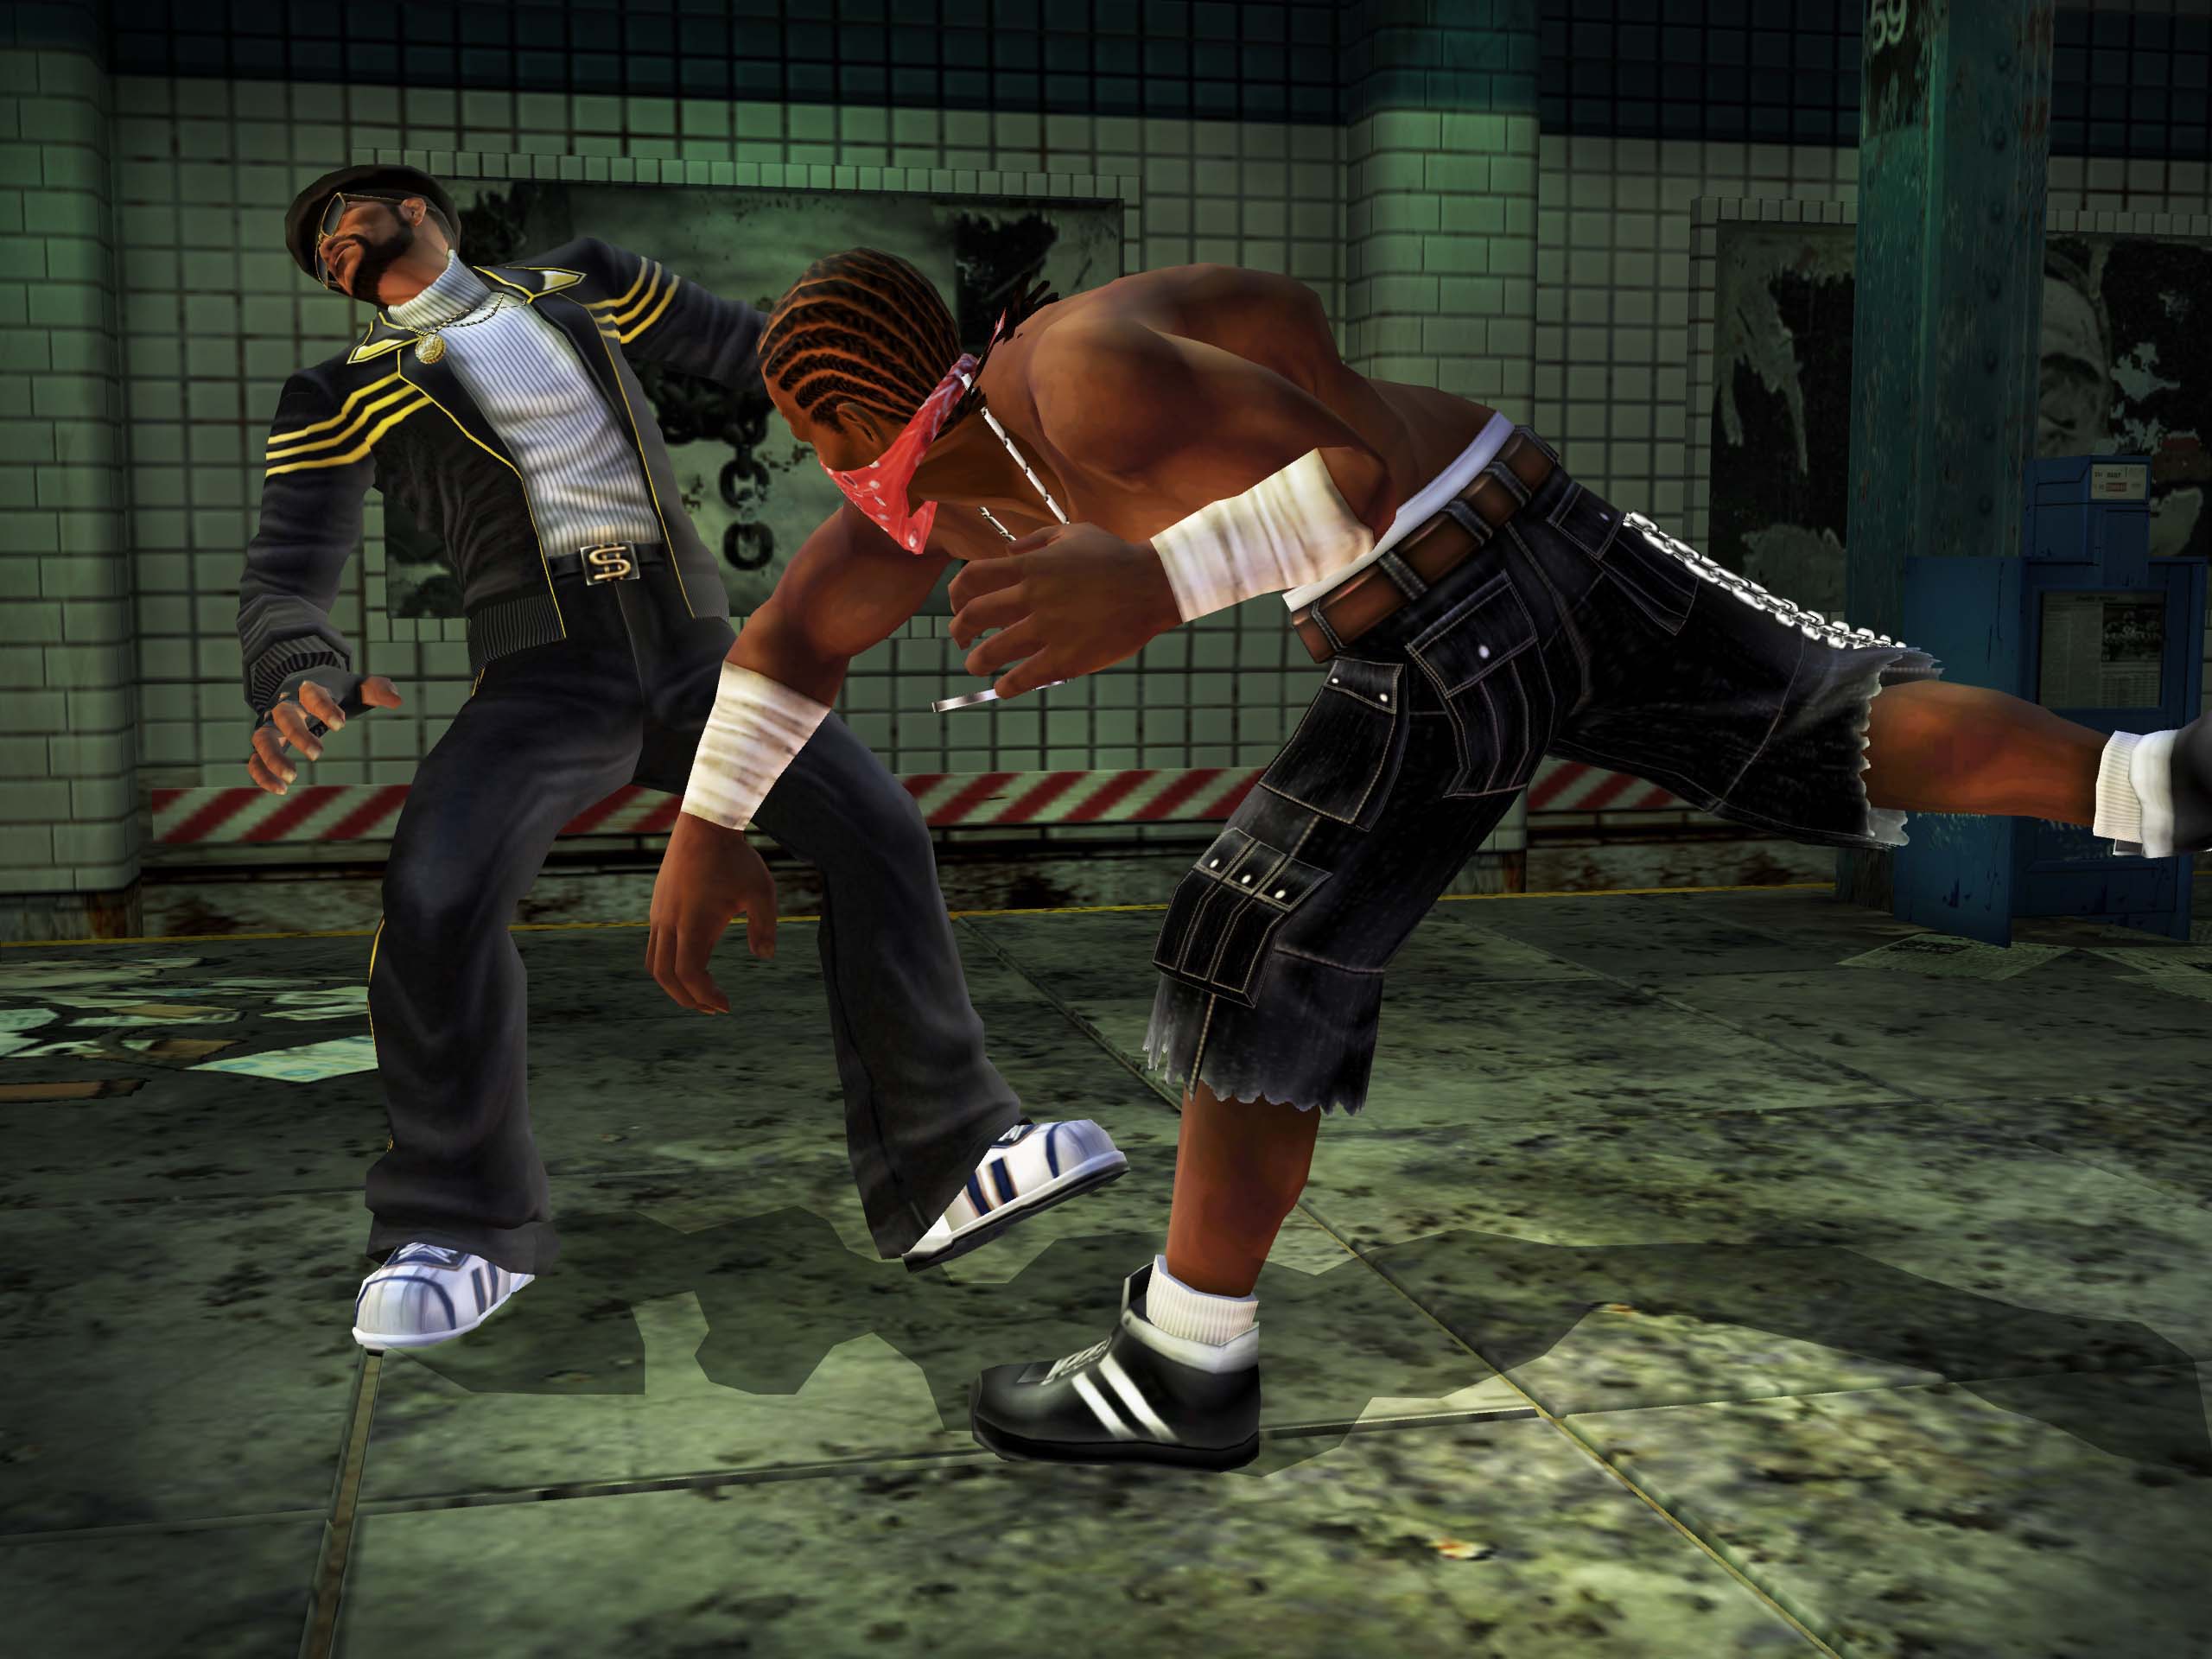 Игры много драки. Игра Def Jam Fight. Def Jam Fight for NY. Def Jam 2 ps2. PLAYSTATION 2 Def Jam Fight for NY.